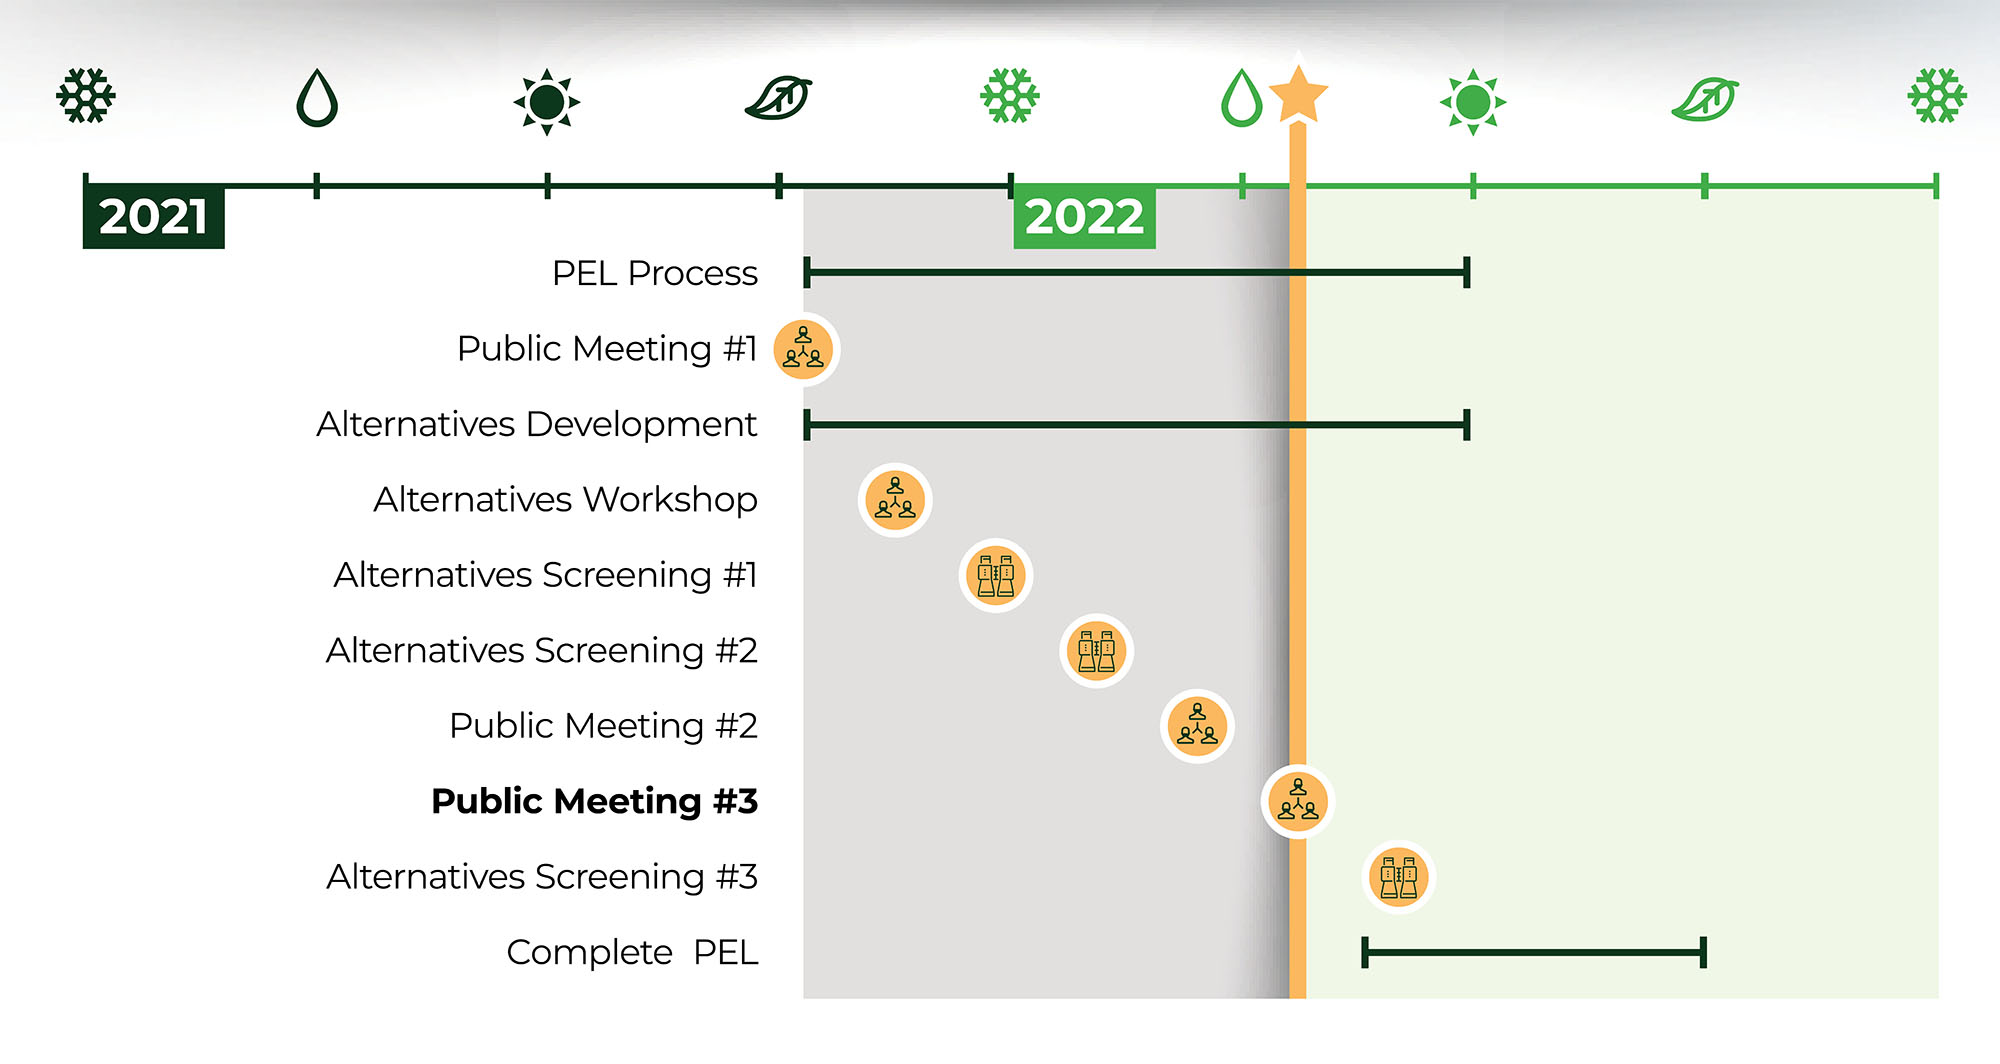 Project schedule: First public meeting in Fall 2021. The PEL process and Alternatives Development will continue through summer 2022. Alternatives Screenings 1 and 2 are scheduled for winter 2022 along with the second public meeting. Alternatives screening 3 is scheduled for end of Spring 2022. We are at public meeting 3 , mid-spring 2022. PEL completion starting then through summer.